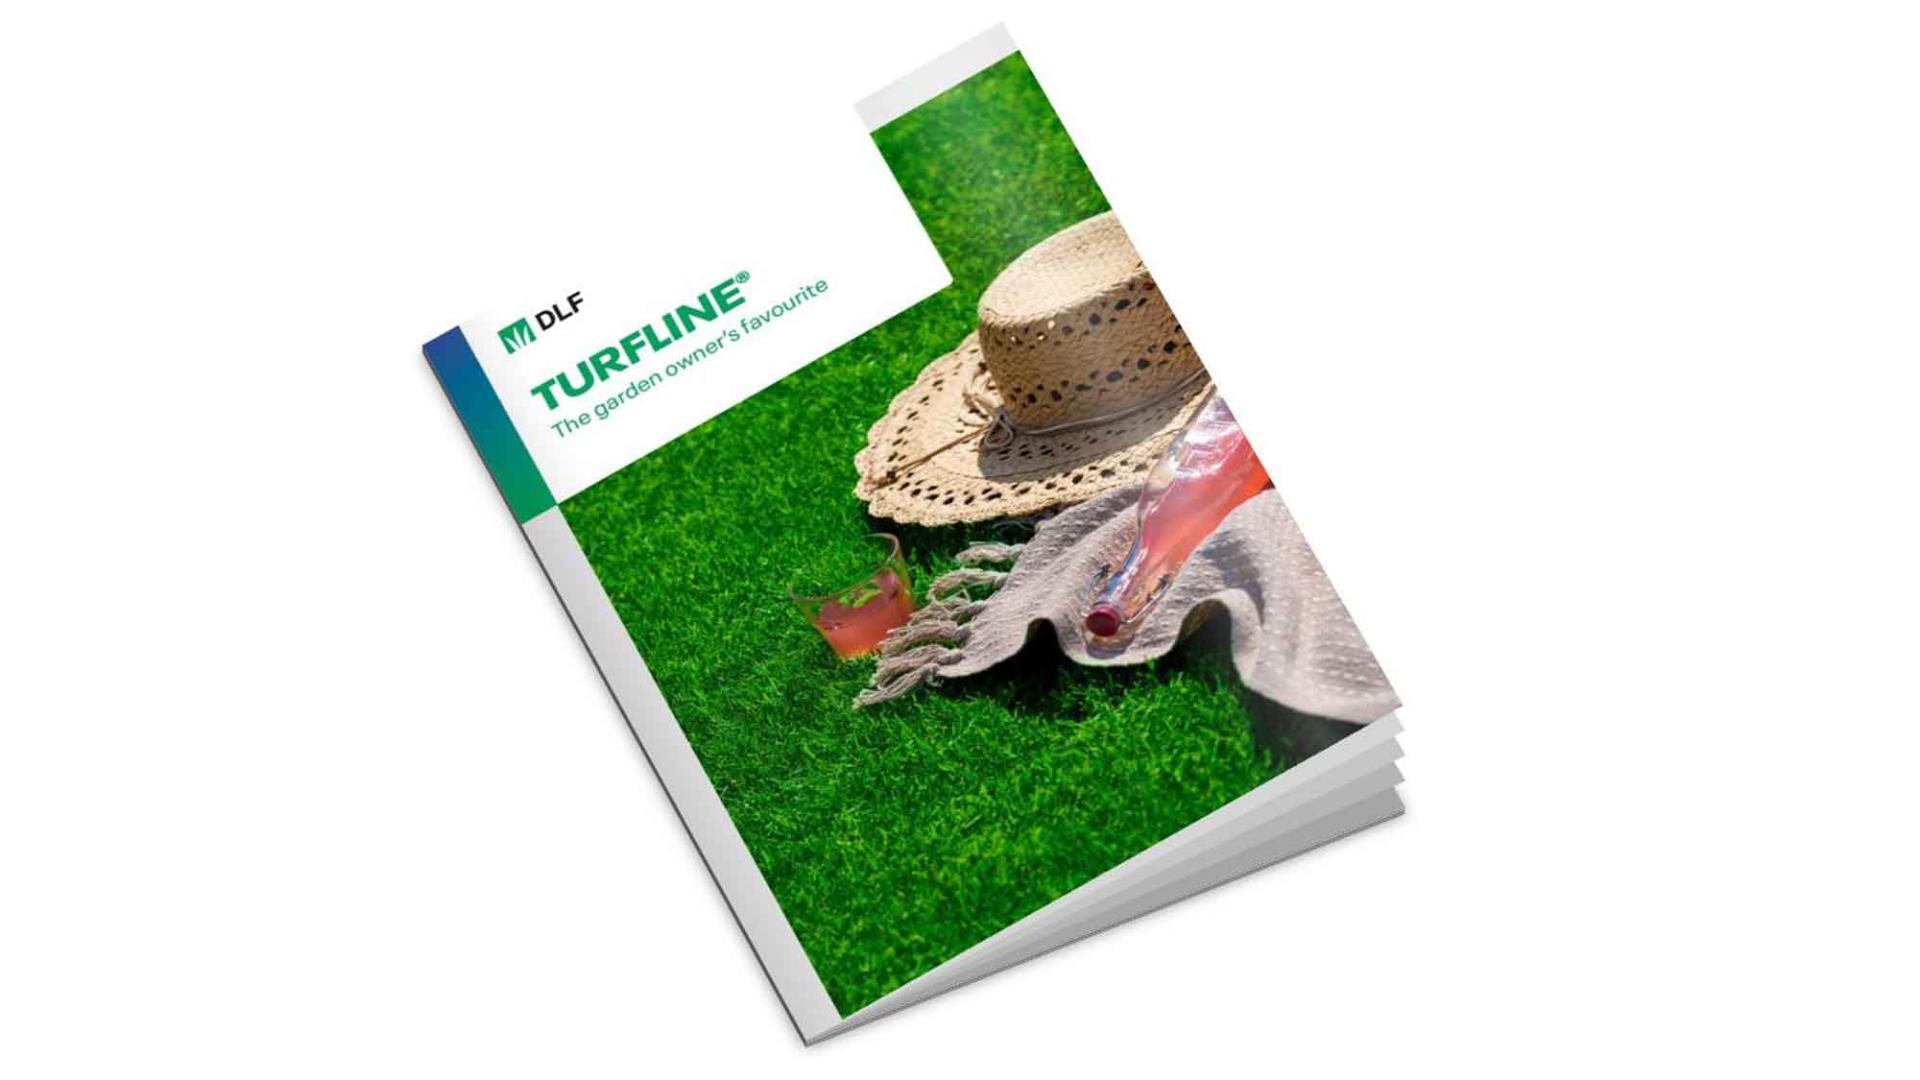 New TURFLINE brochure out now